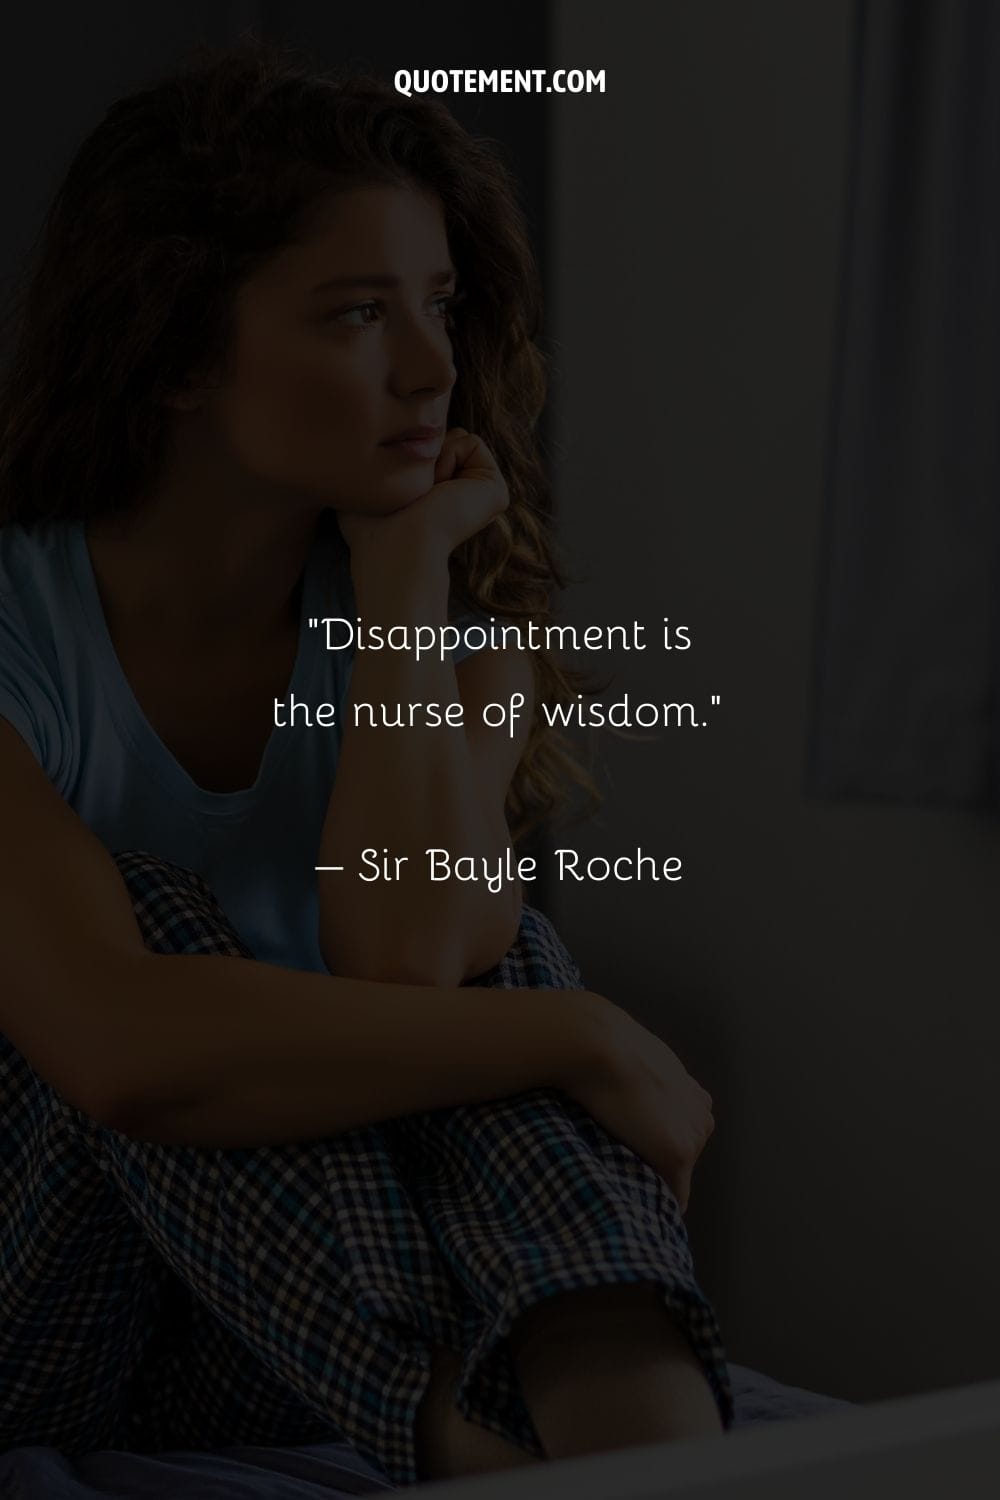 Disappointment is the nurse of wisdom